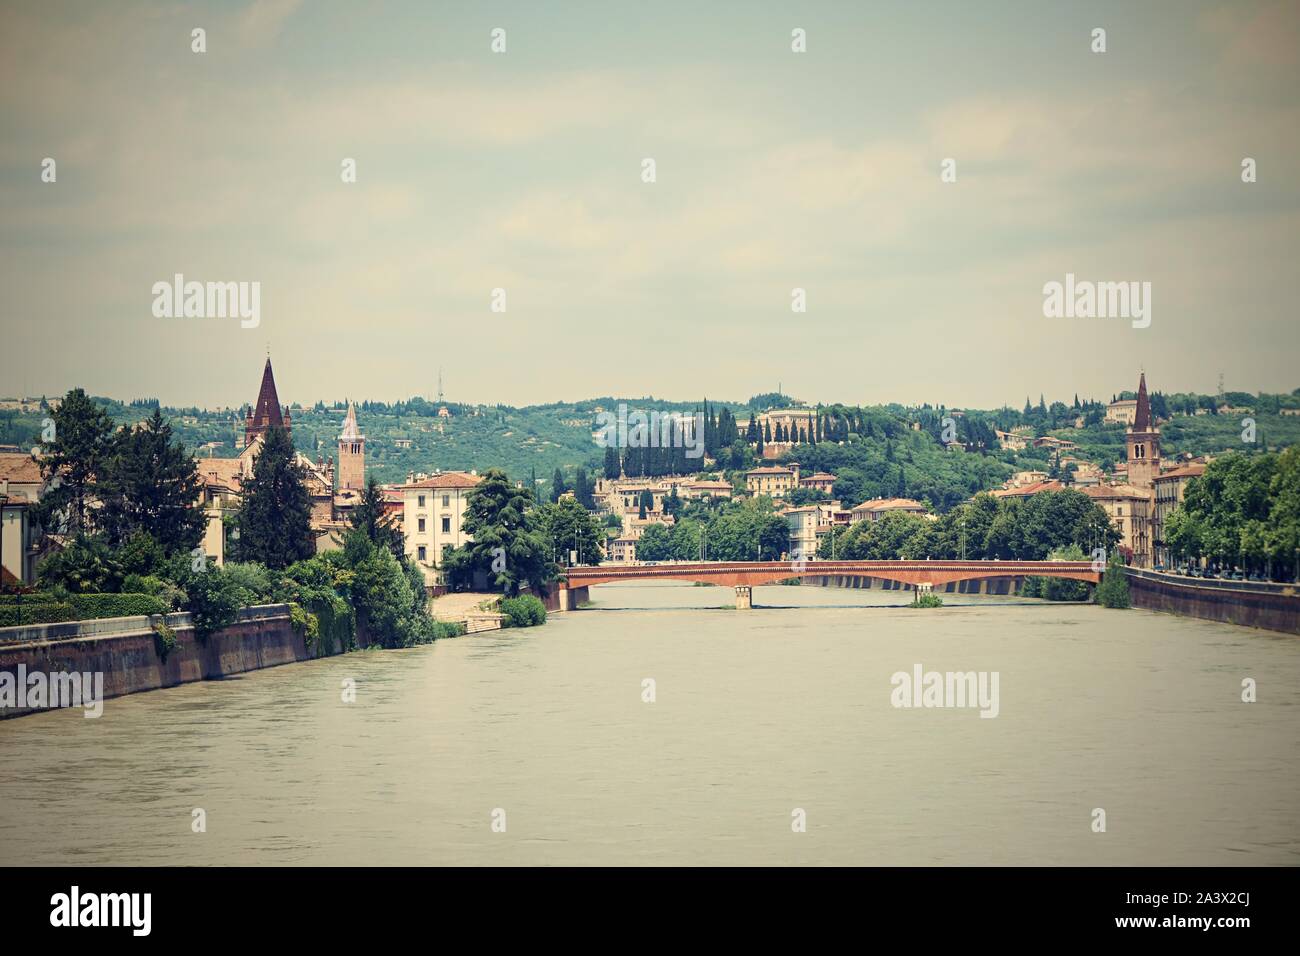 Horizontal photo with view on Adige river. River flows through famous Verona city in Italy. Old bridge and several buildings are visible in background Stock Photo